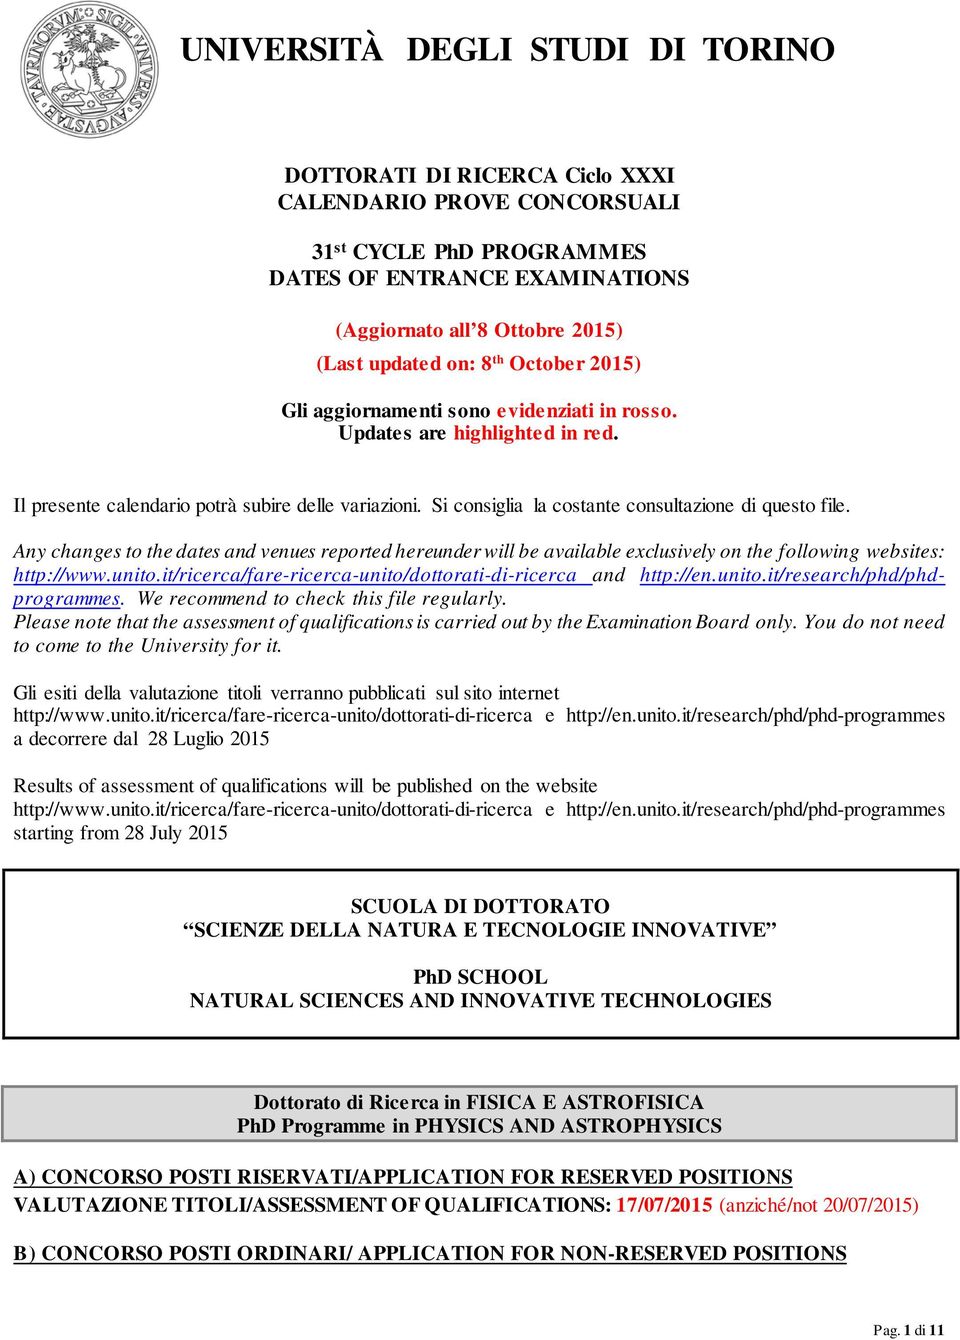 Si consiglia la costante consultazione di questo file. Any changes to the dates and venues reported hereunder will be available exclusively on the following websites: http://www.unito.